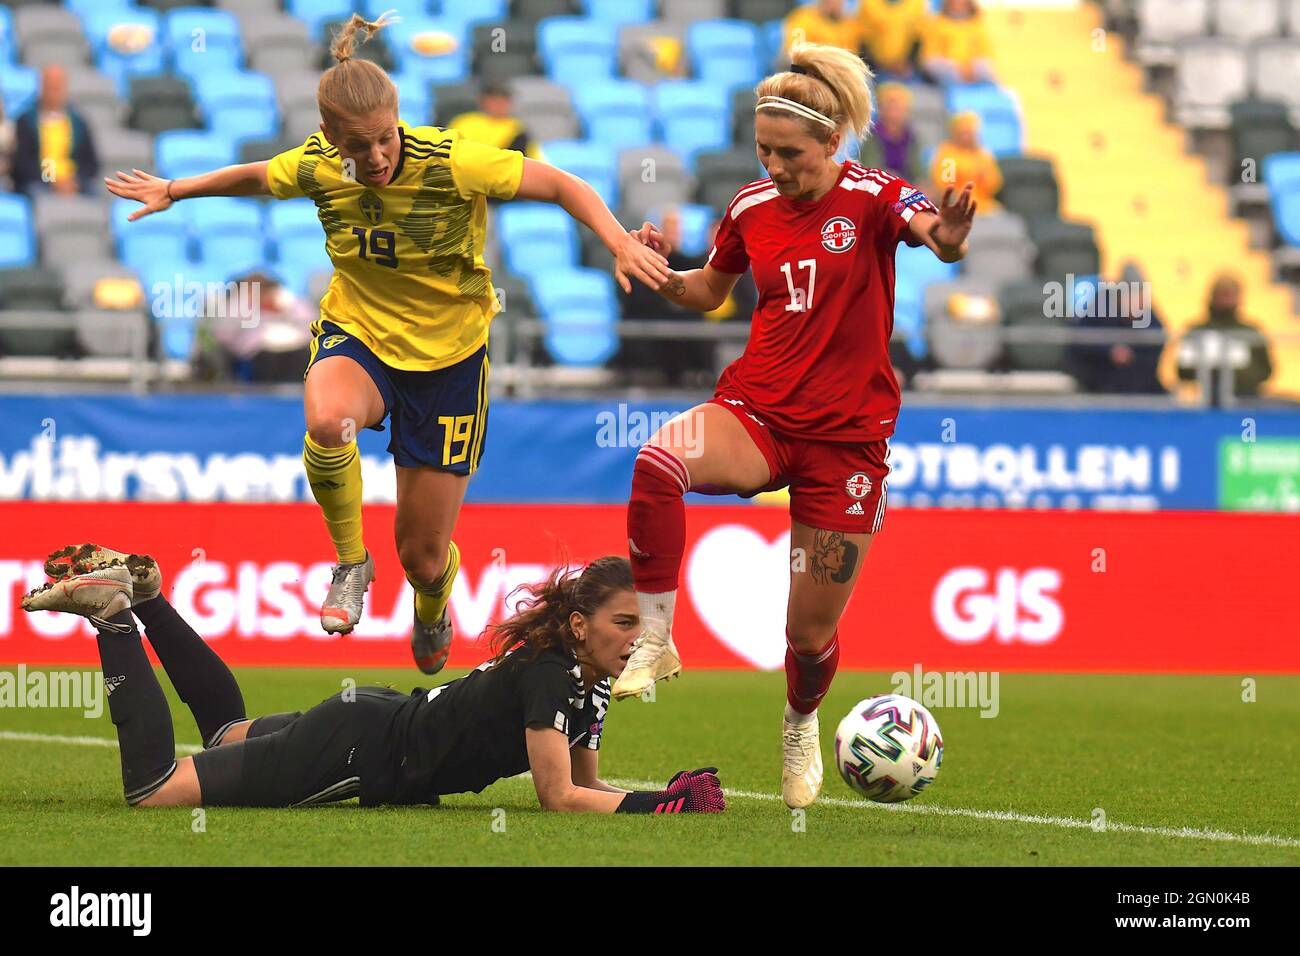 Sweden 19 Anna Anvegård, Nino Sutidze (17 Georgia) and Tatia Gabunia (12 Georgia) during the World Cup 2021 qulification game on September 21st 2021 between Sweden and Georgia at Gamla Ullevi in Gothenburg, Sweden Stock Photo